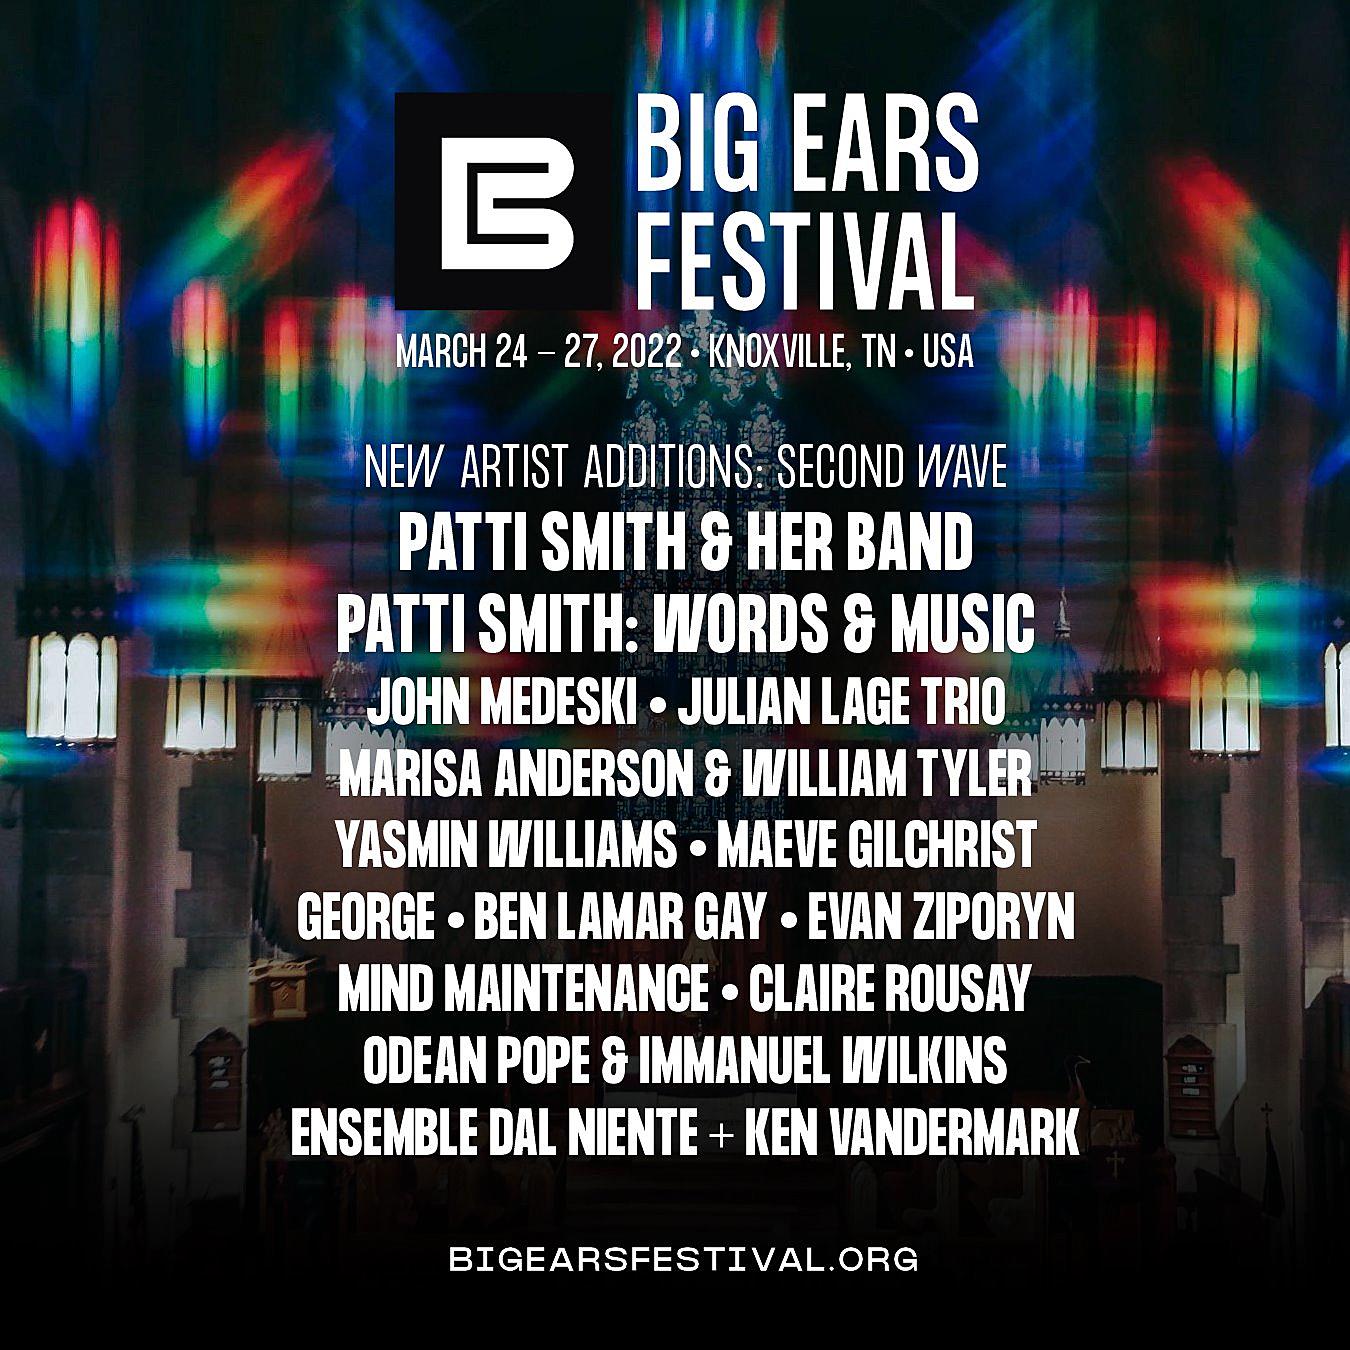 Big Ears Festival Announces Additional Acts to 2022 Lineup